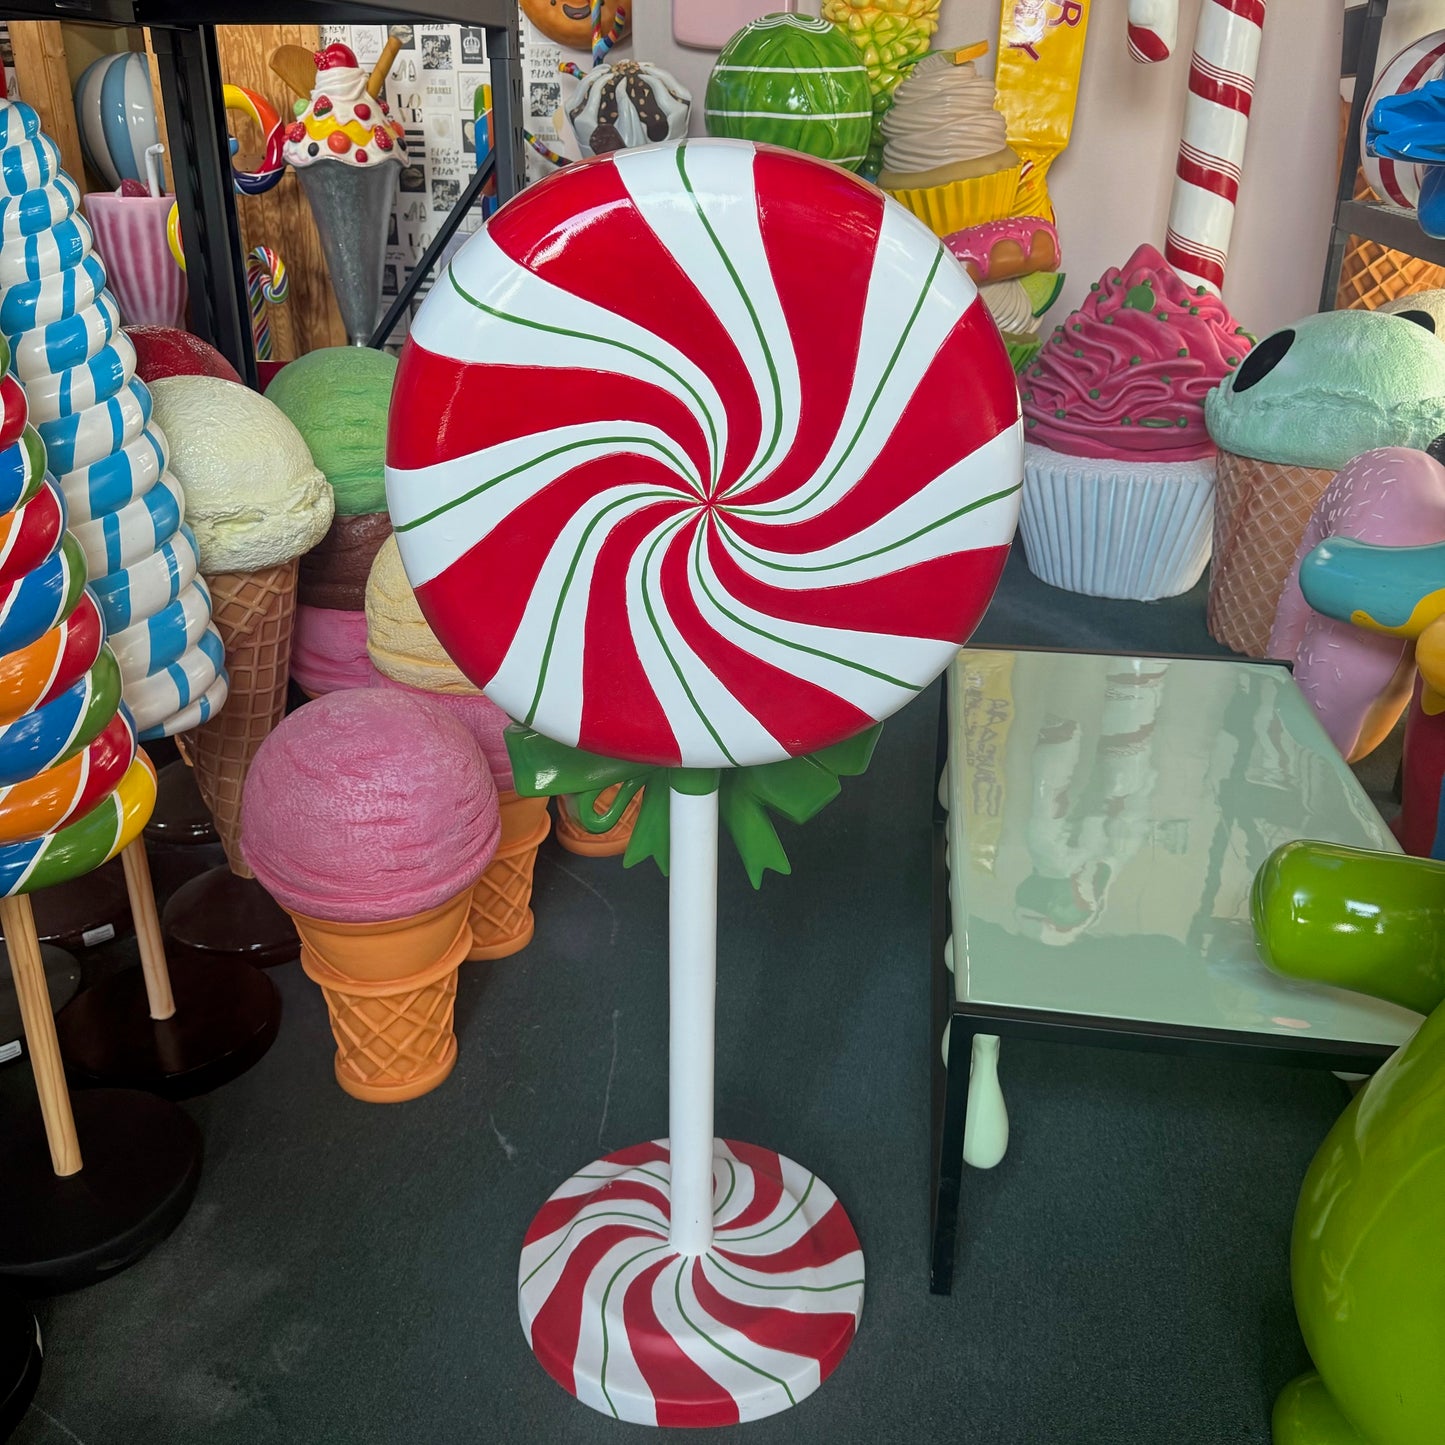 Small Swirl Lollipop With Bow Statue